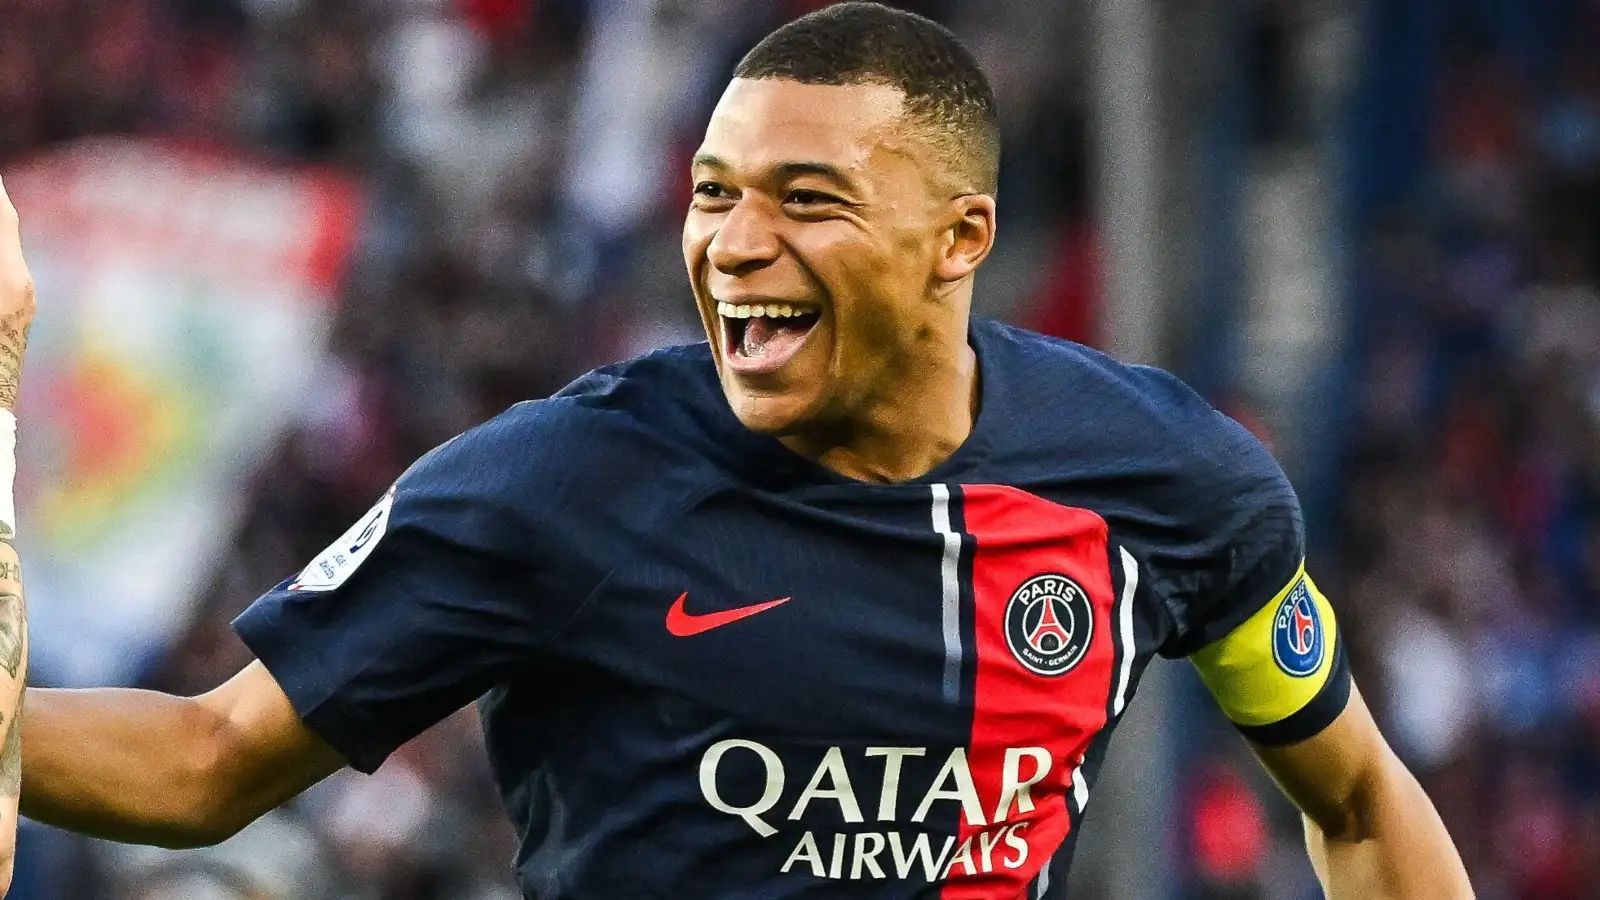 Kylian Mbappe position at Real Madrid already decided – French superstar accepts challenge